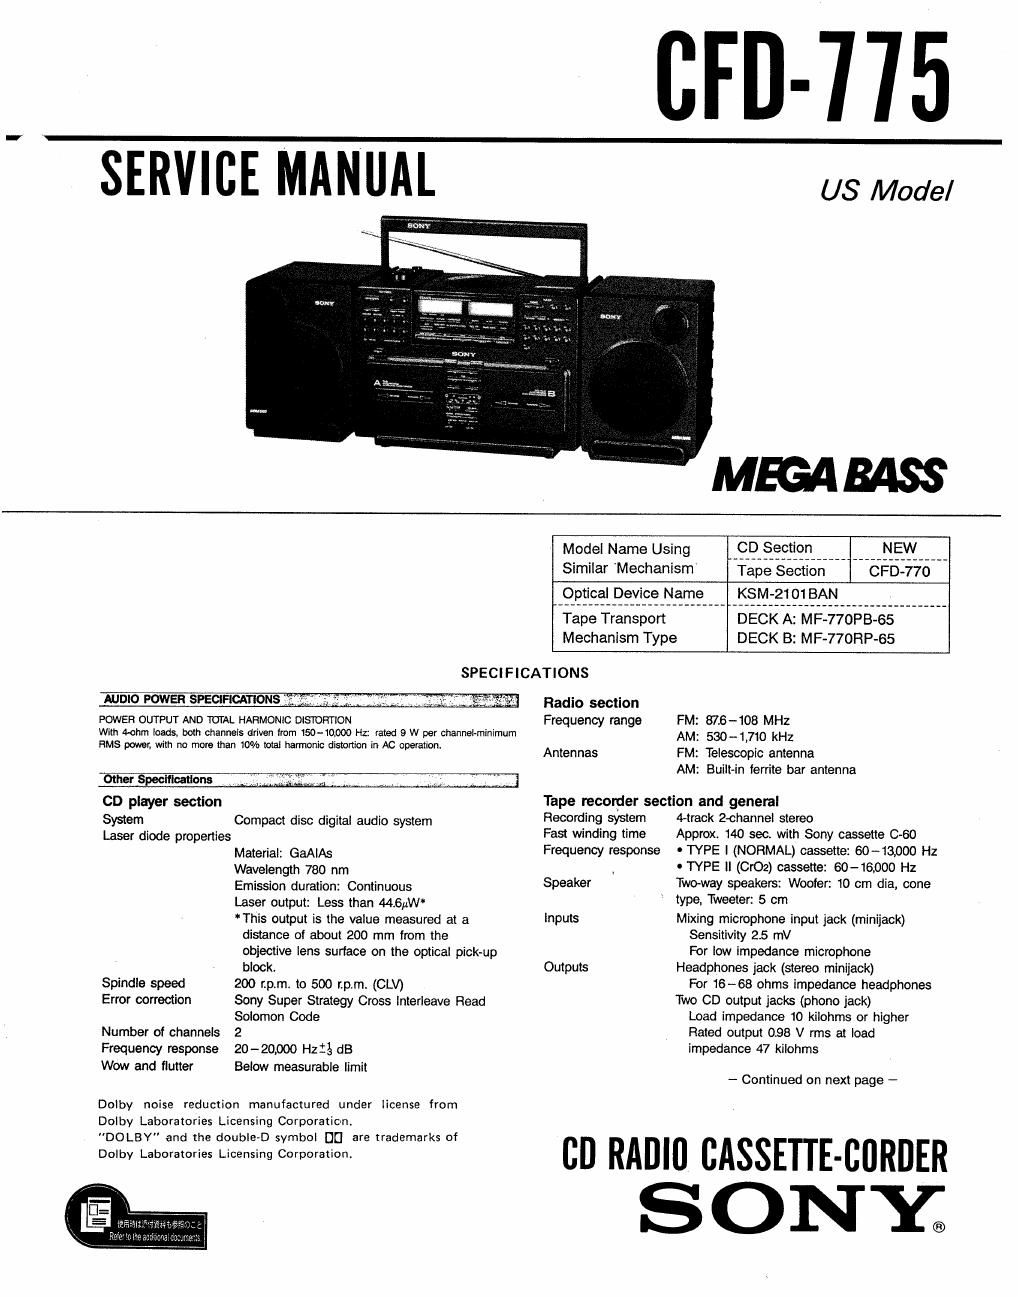 sony cfd 775 service manual